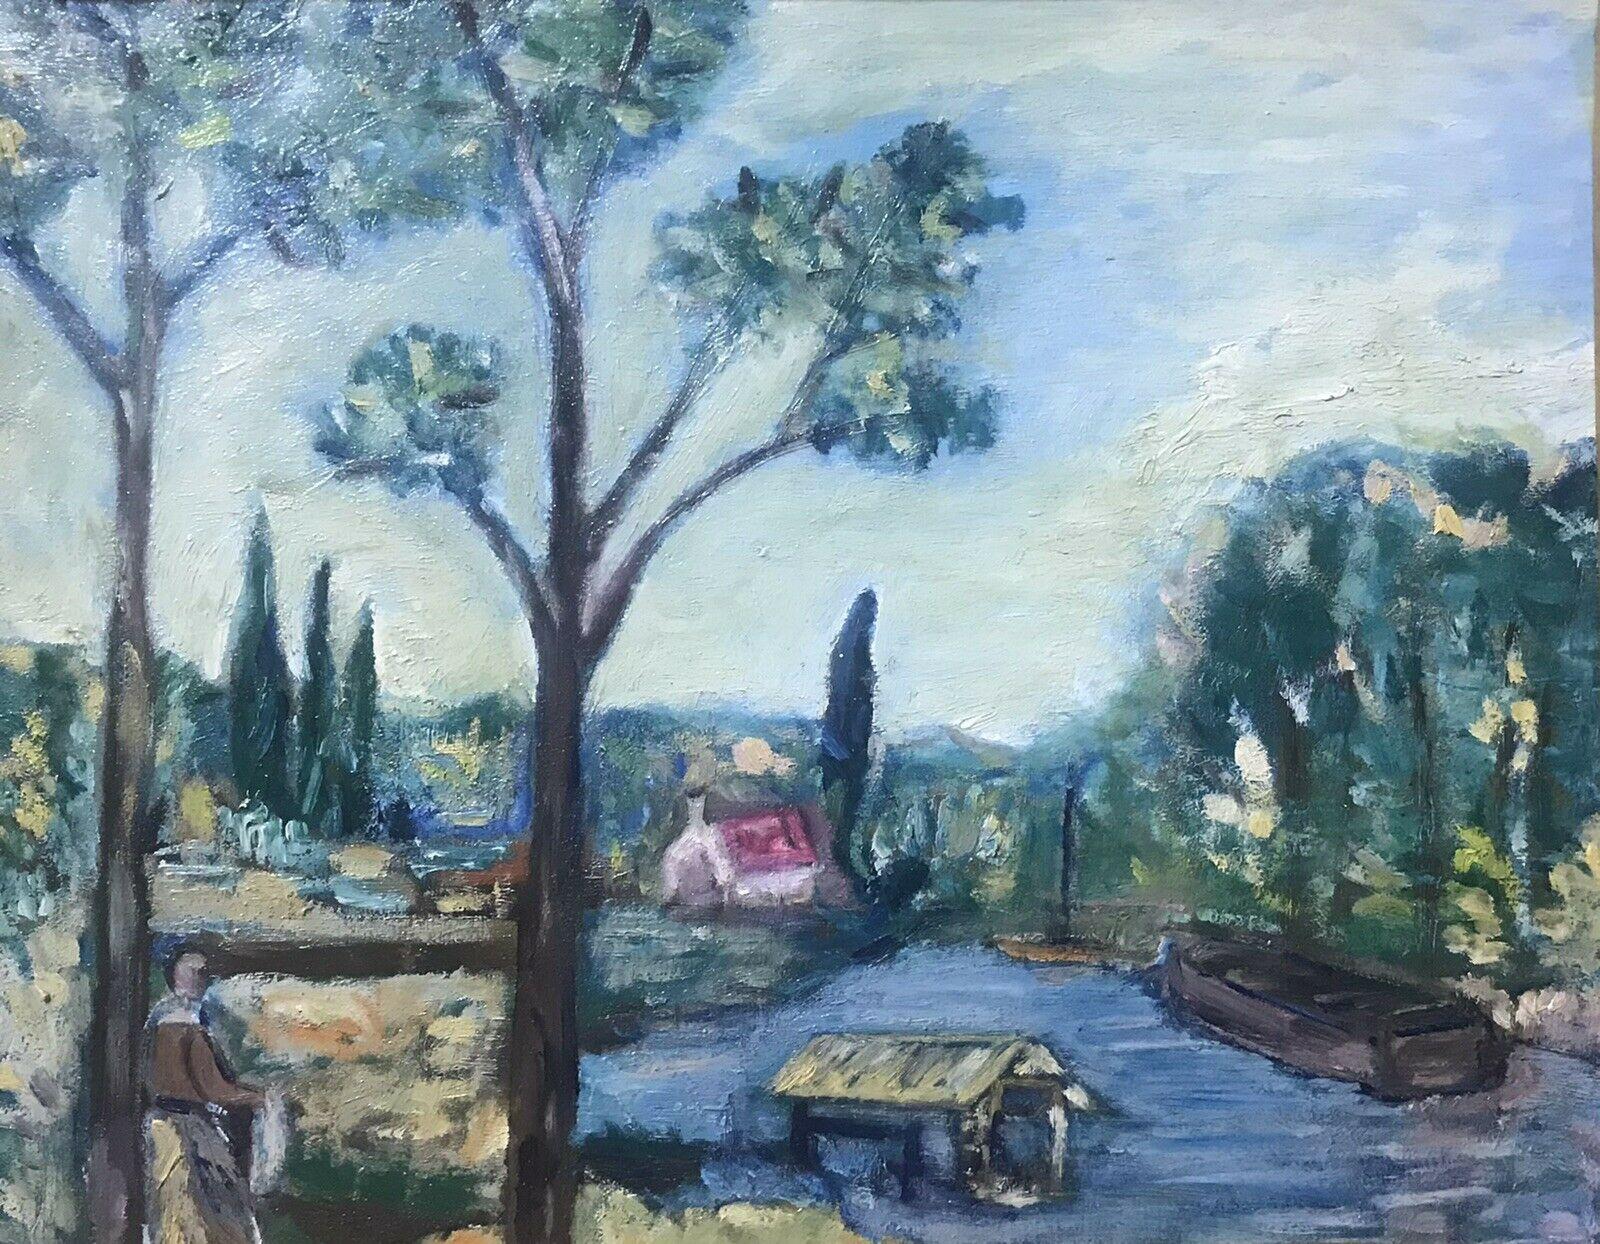 FINE 20TH CENTURY FRENCH POST-IMPRESSIONIST OIL - PROVENCAL RIVER LANDSCAPE - Painting by Unknown